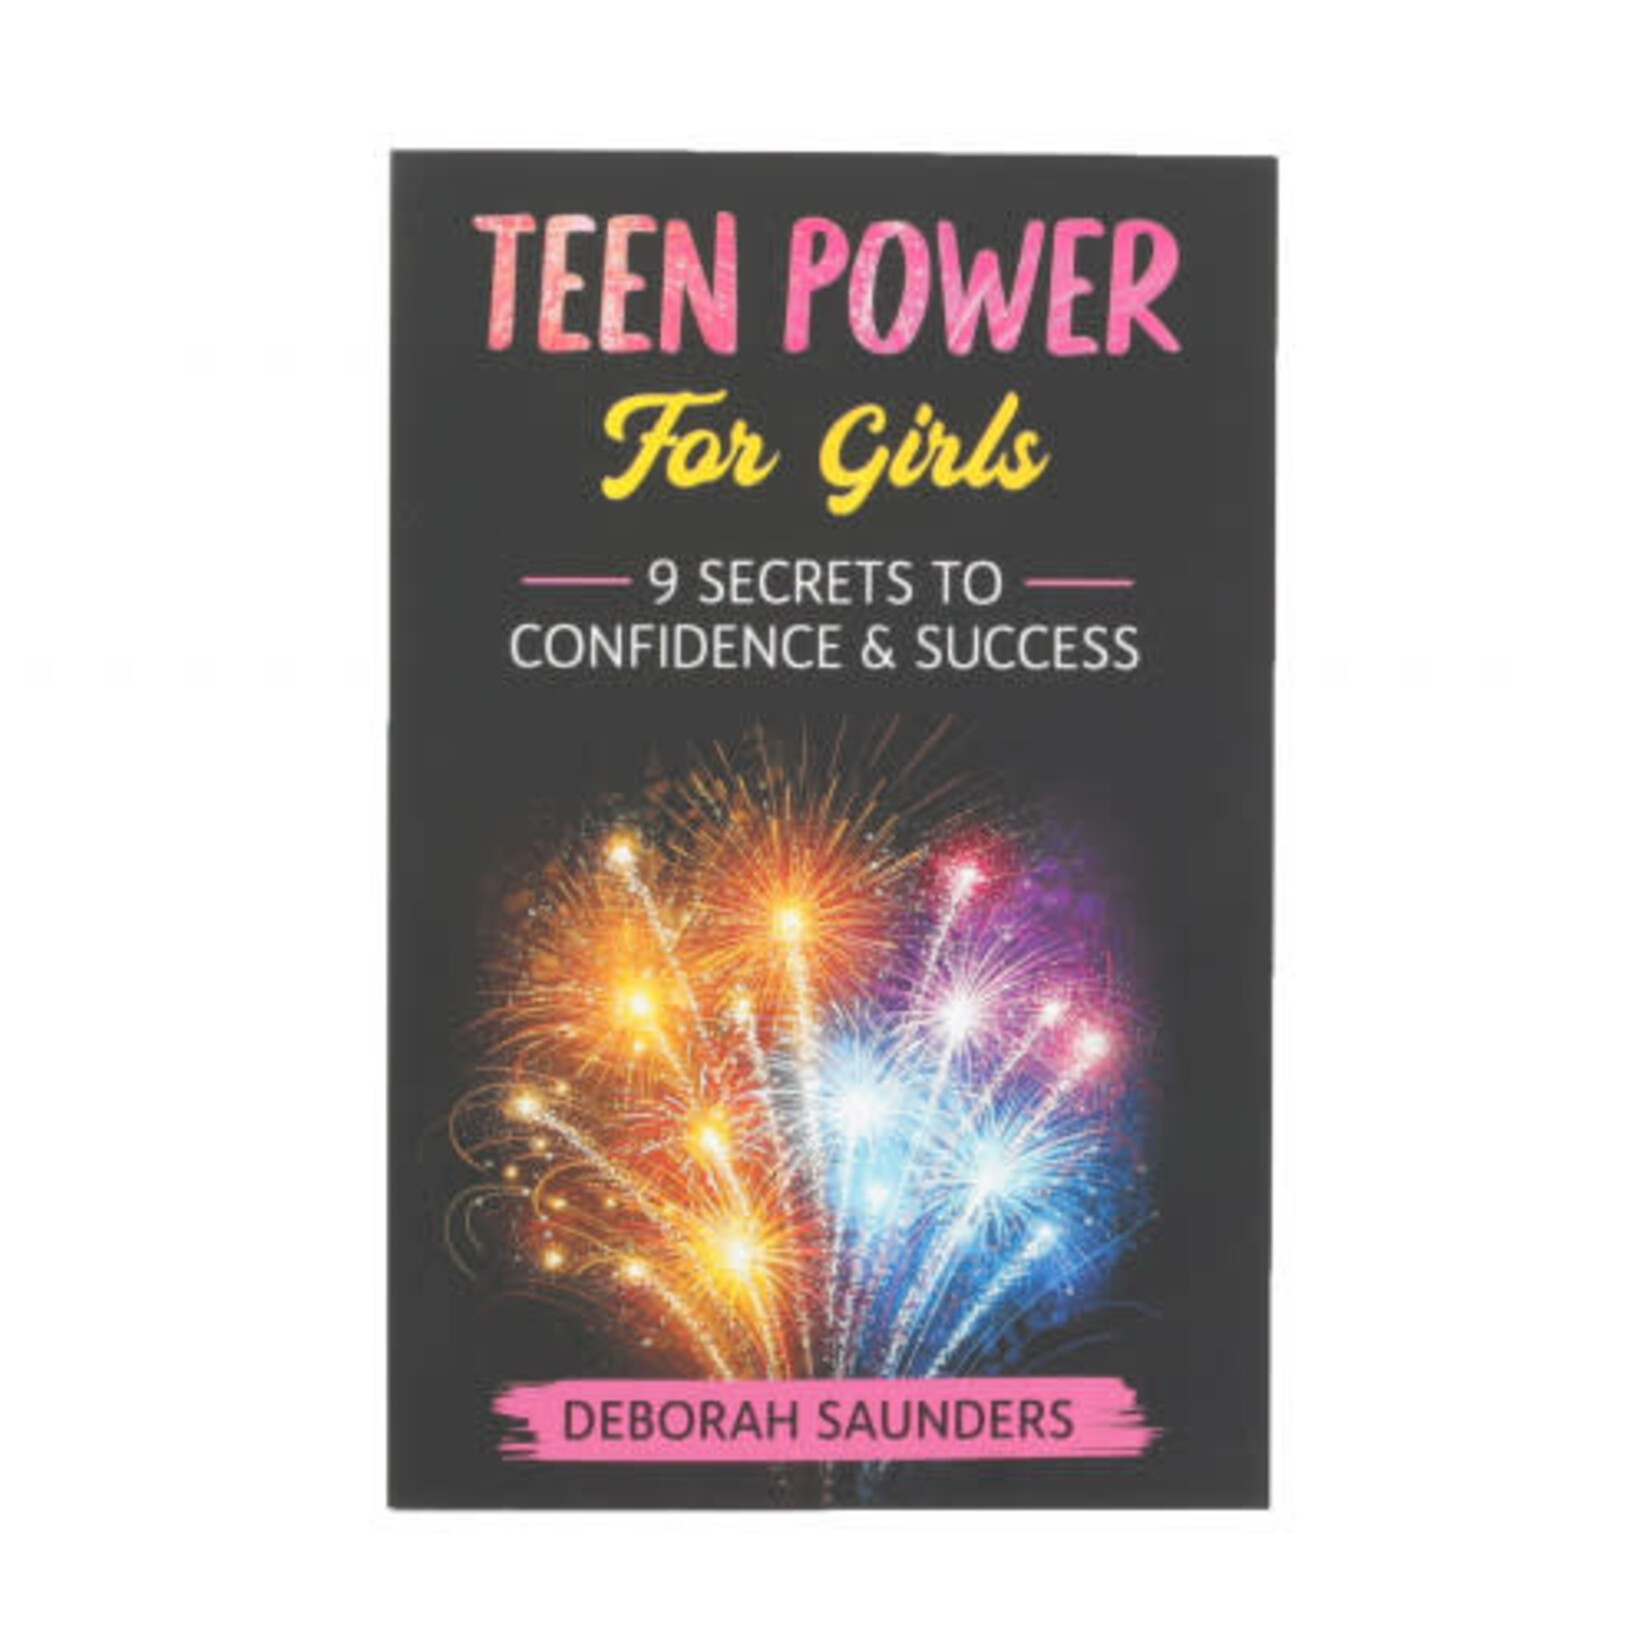 Teen Power for girls: 9 Secrets to Confidence and Success